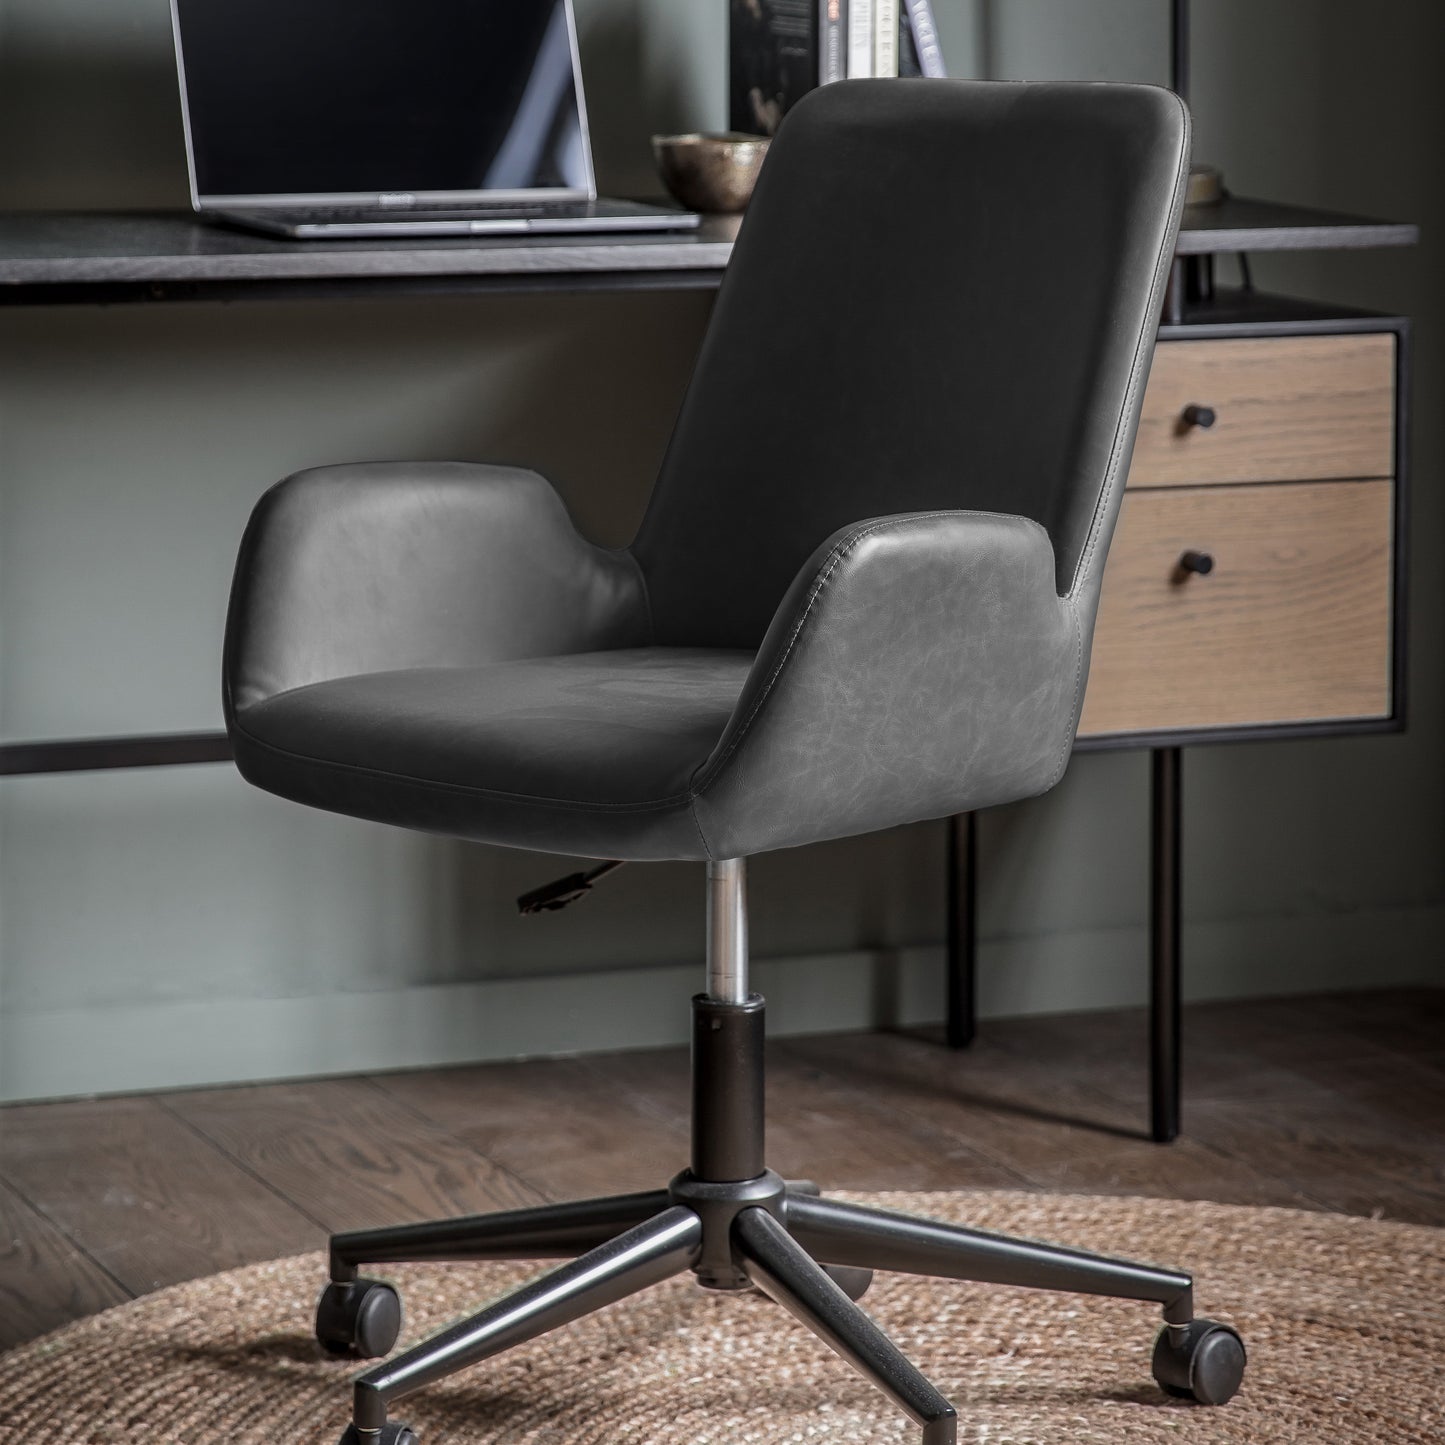 Load image into Gallery viewer, A charcoal Noss Swivel Chair with a black leather seat for interior decor by Kikiathome.co.uk.
